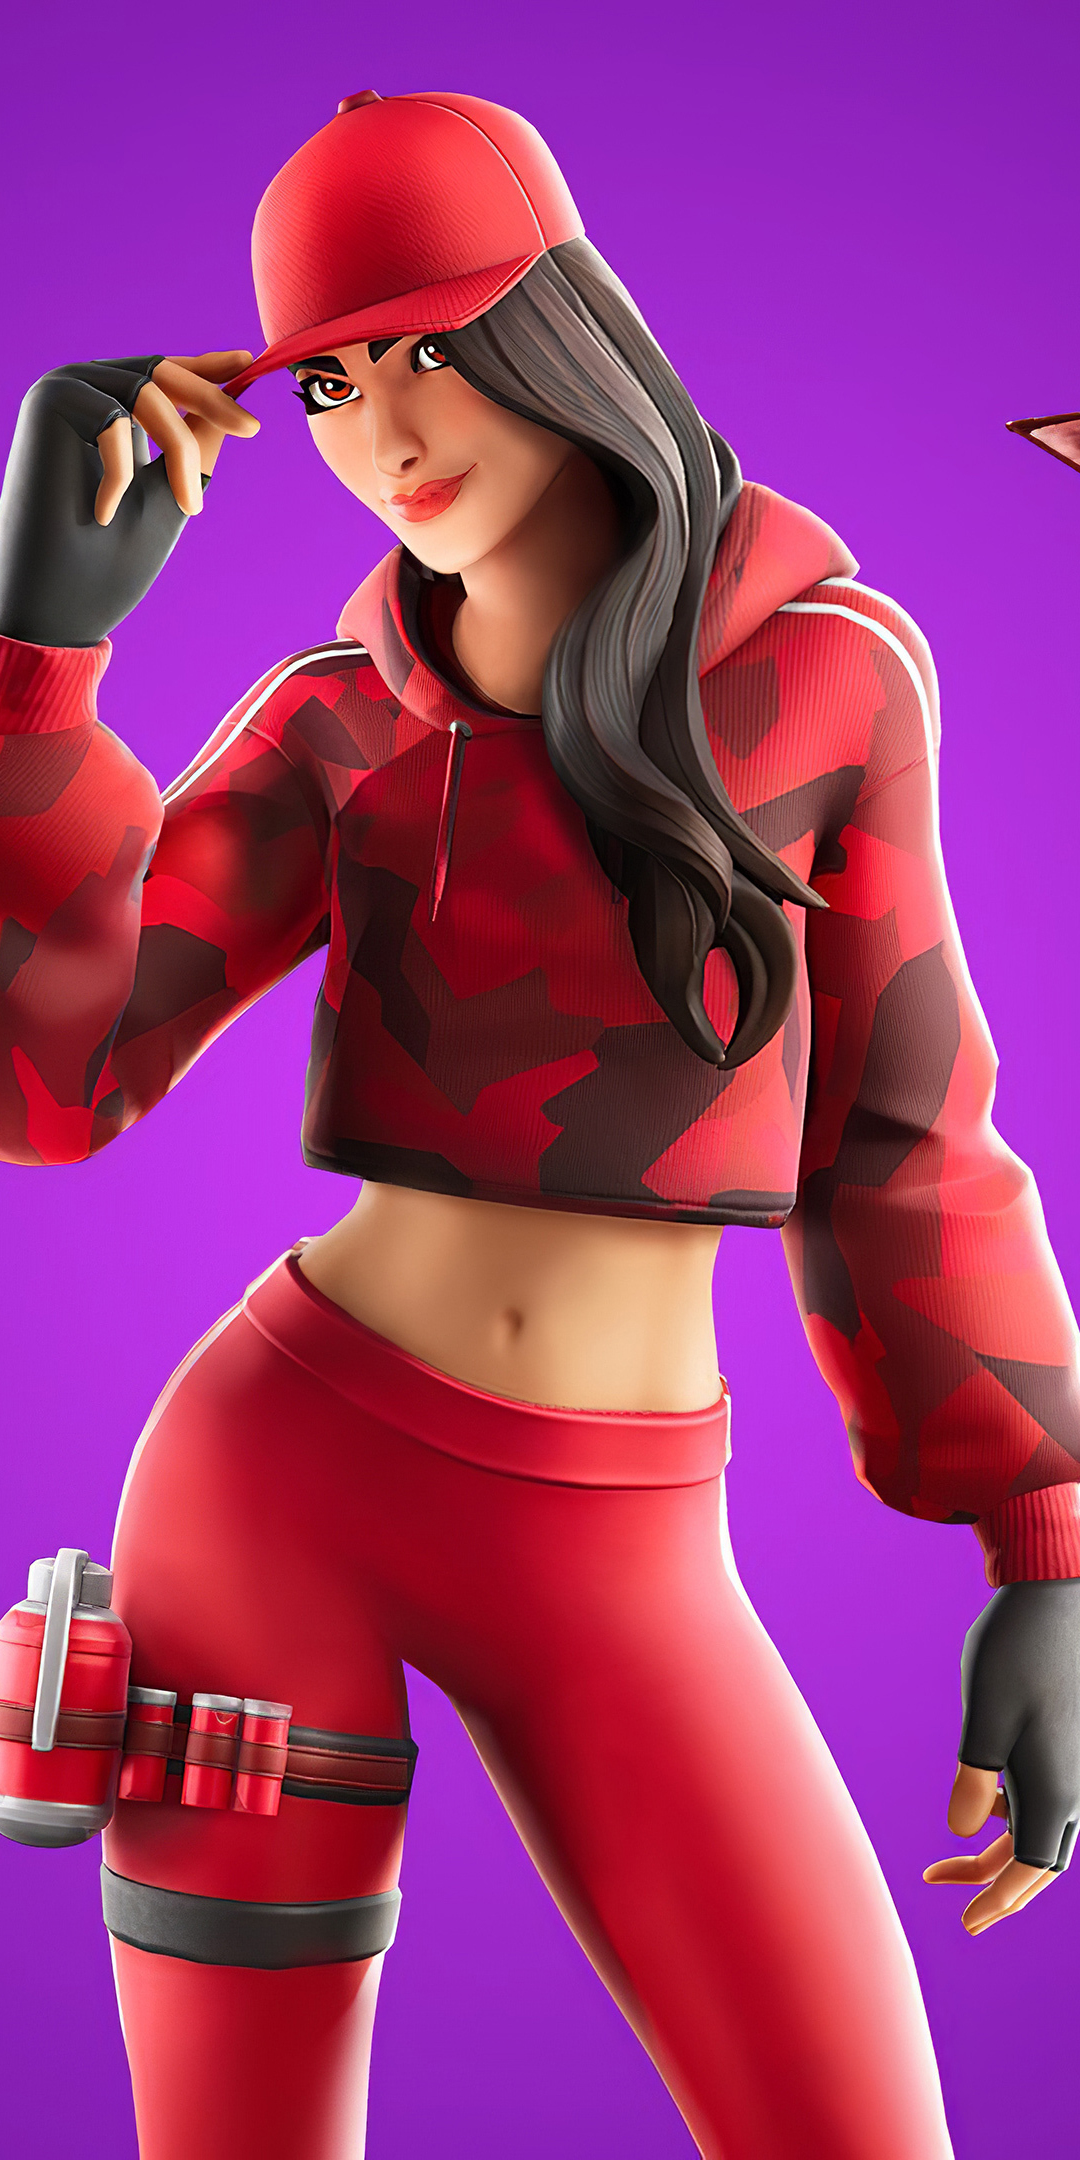 Fortnite chapter 2, Ruby red Outfit, 2019, 1080x2160 wallpaper